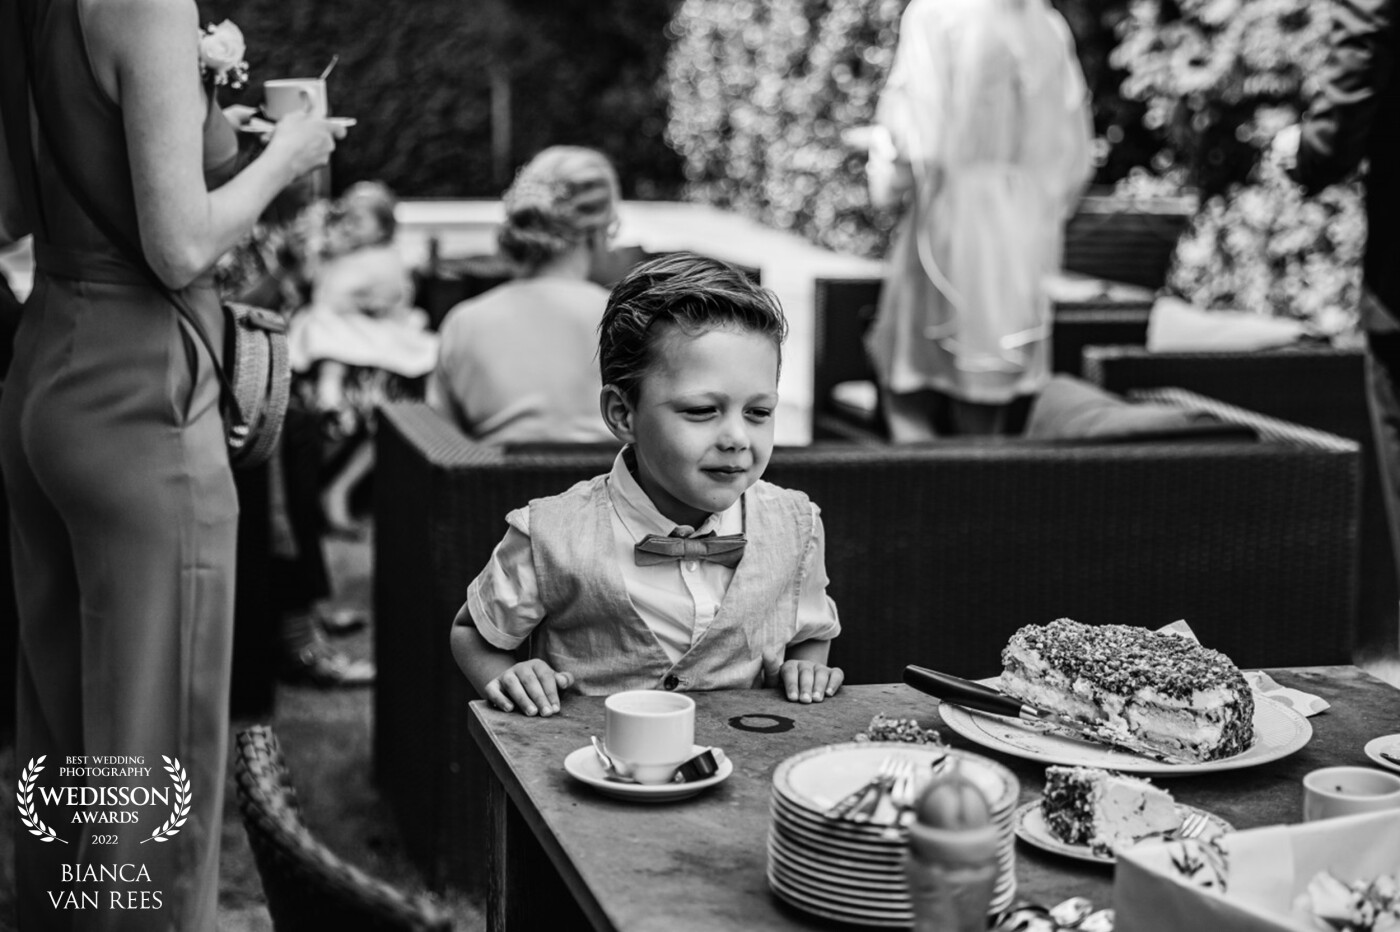 The look on this little mans face tells the entire story.  Staring down at this beautiful and tasty cake, who wouldn't want another piece of that wedding cake?